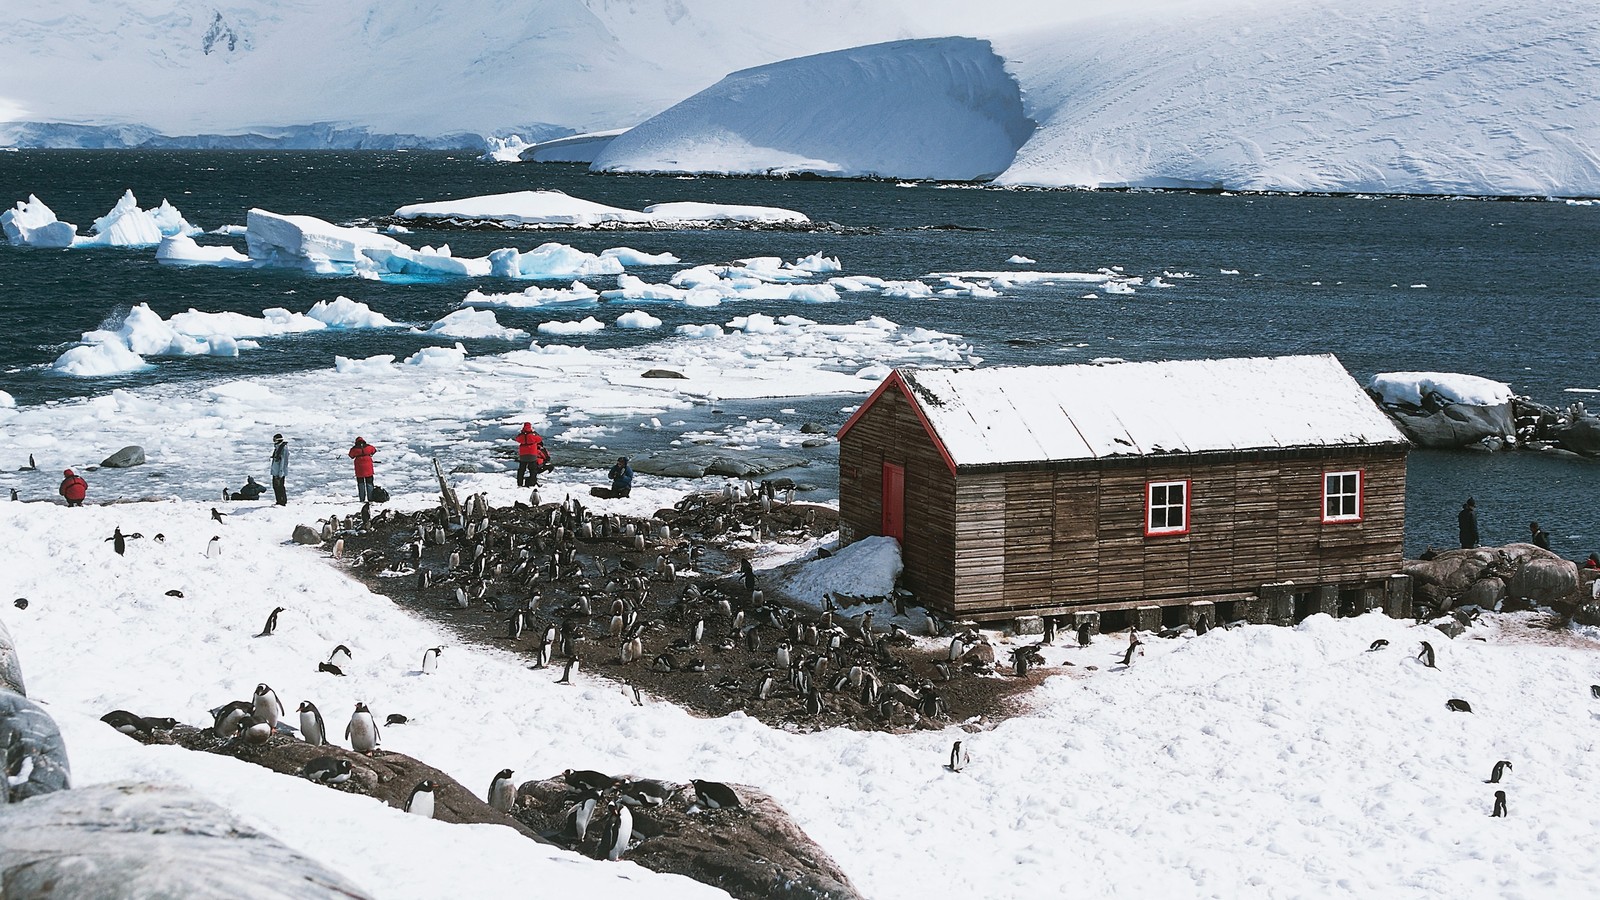 Antarctica Is Running Out of Wilderness - The Atlantic